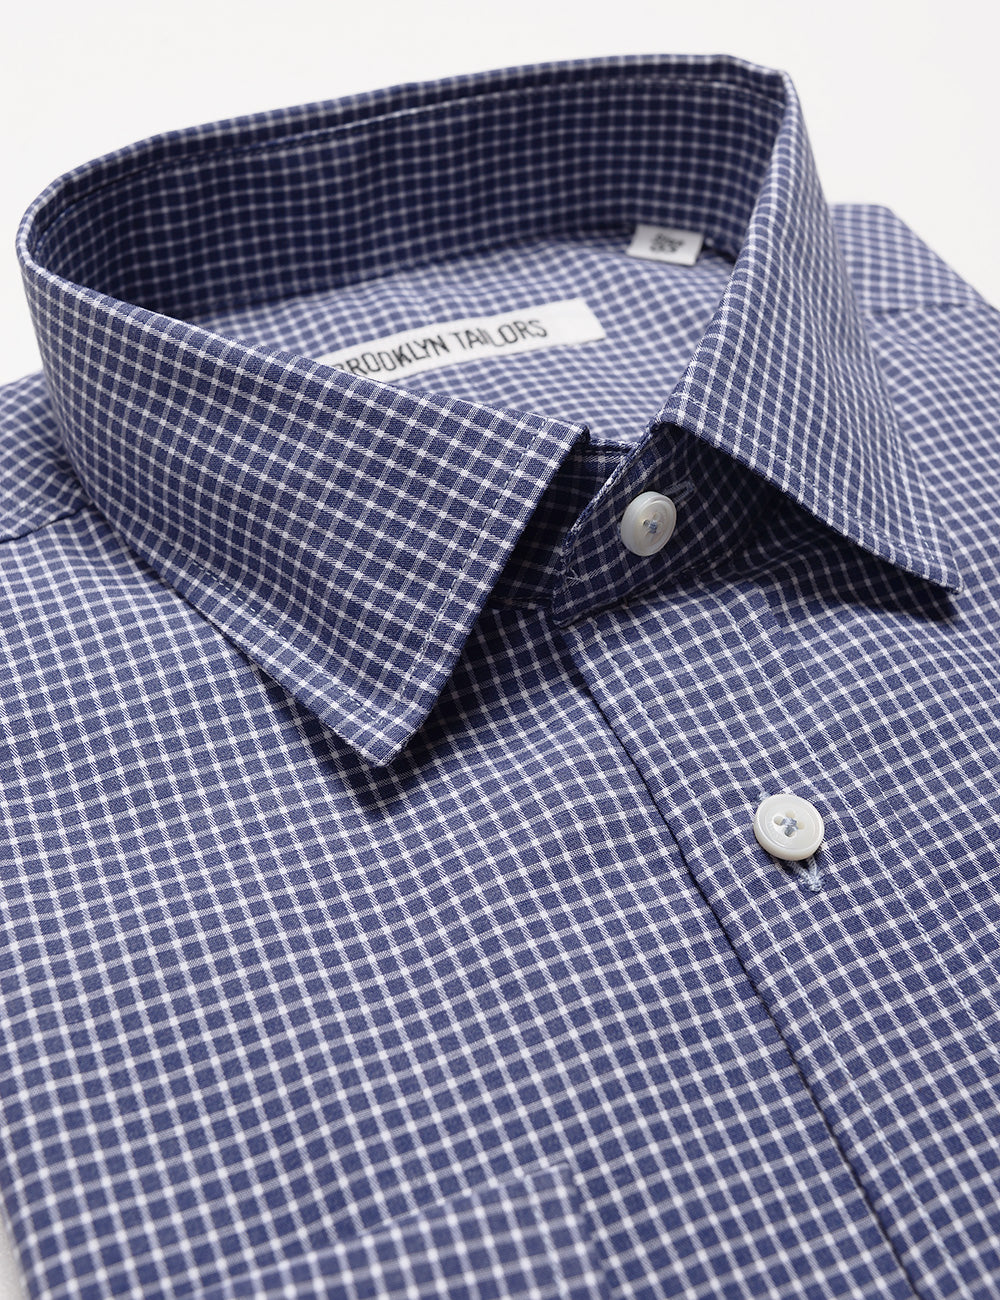 Detail of Brooklyn Tailors BKT20 Slim Dress Shirt in Grid Check - Heather Blue & White showing collar and labeling